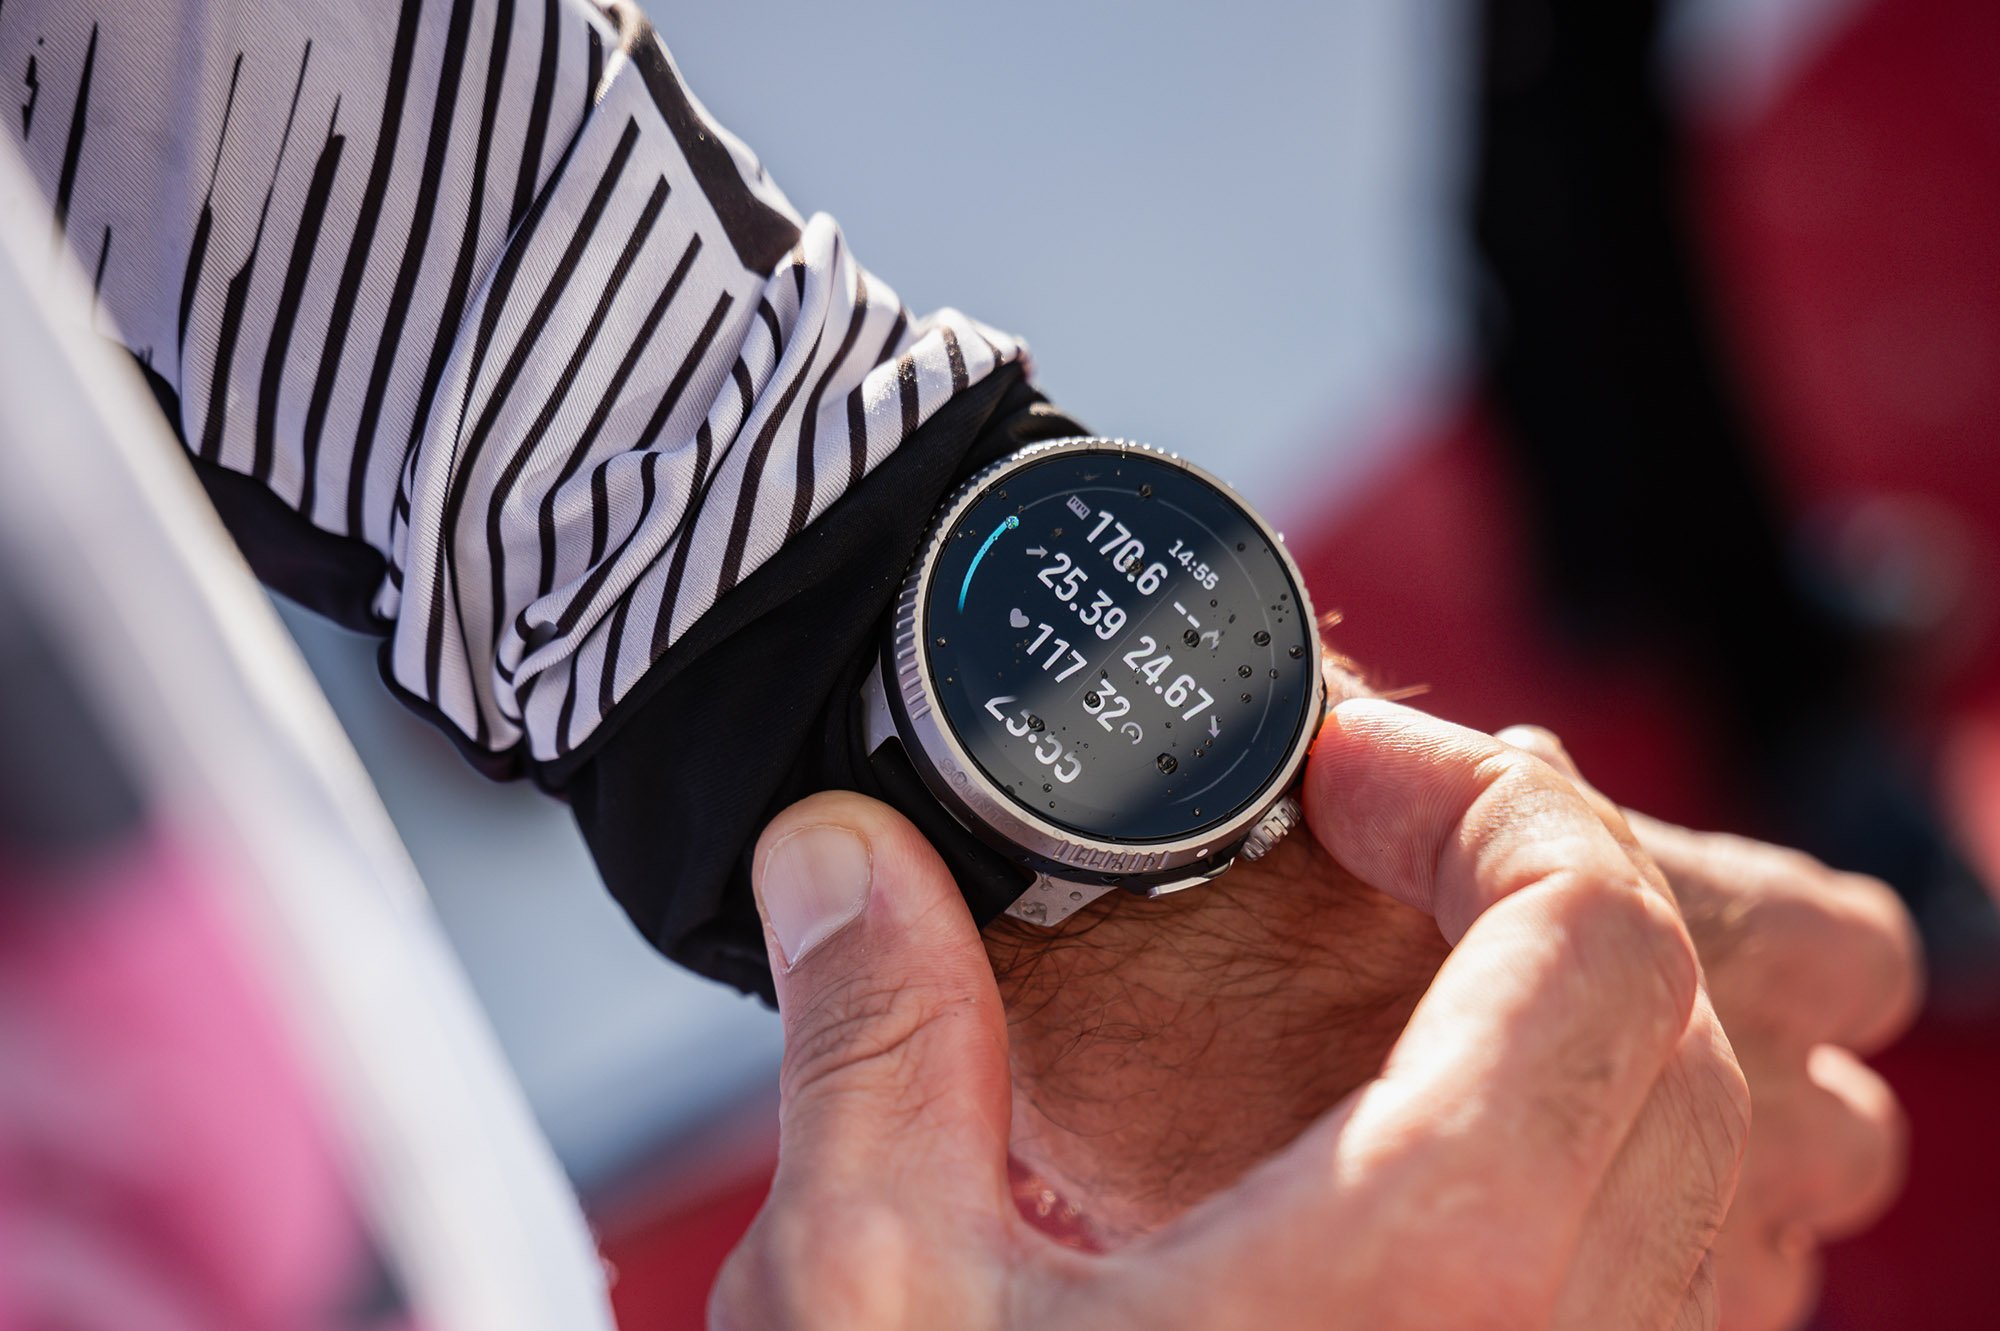 Jakob's tool of choice for the record attempt: Suunto Race GPS watch.